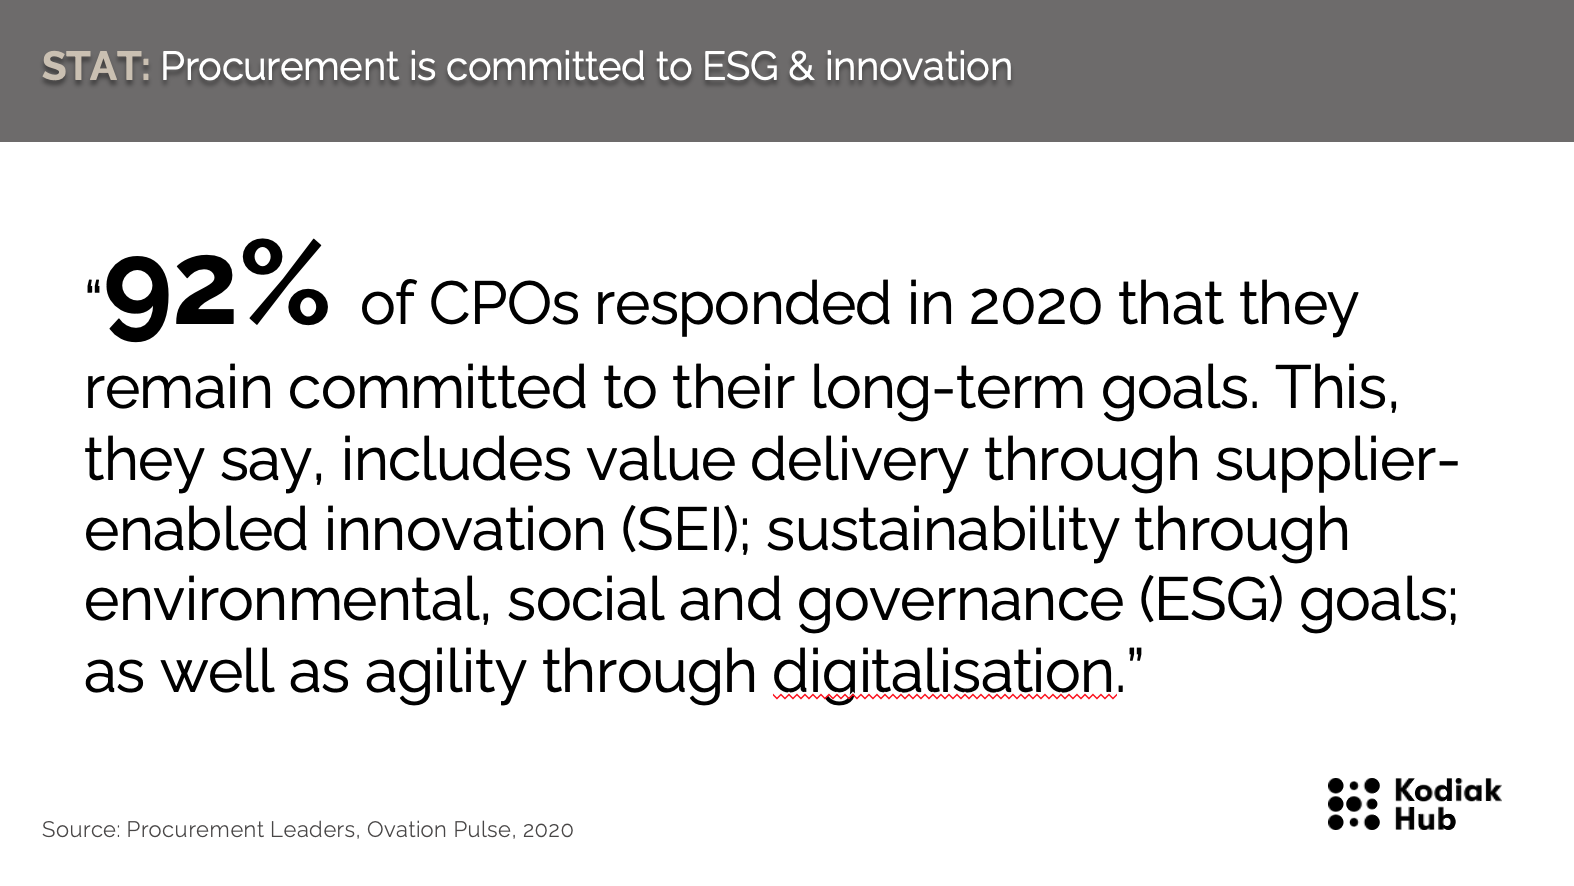 ESG investments among CPO's